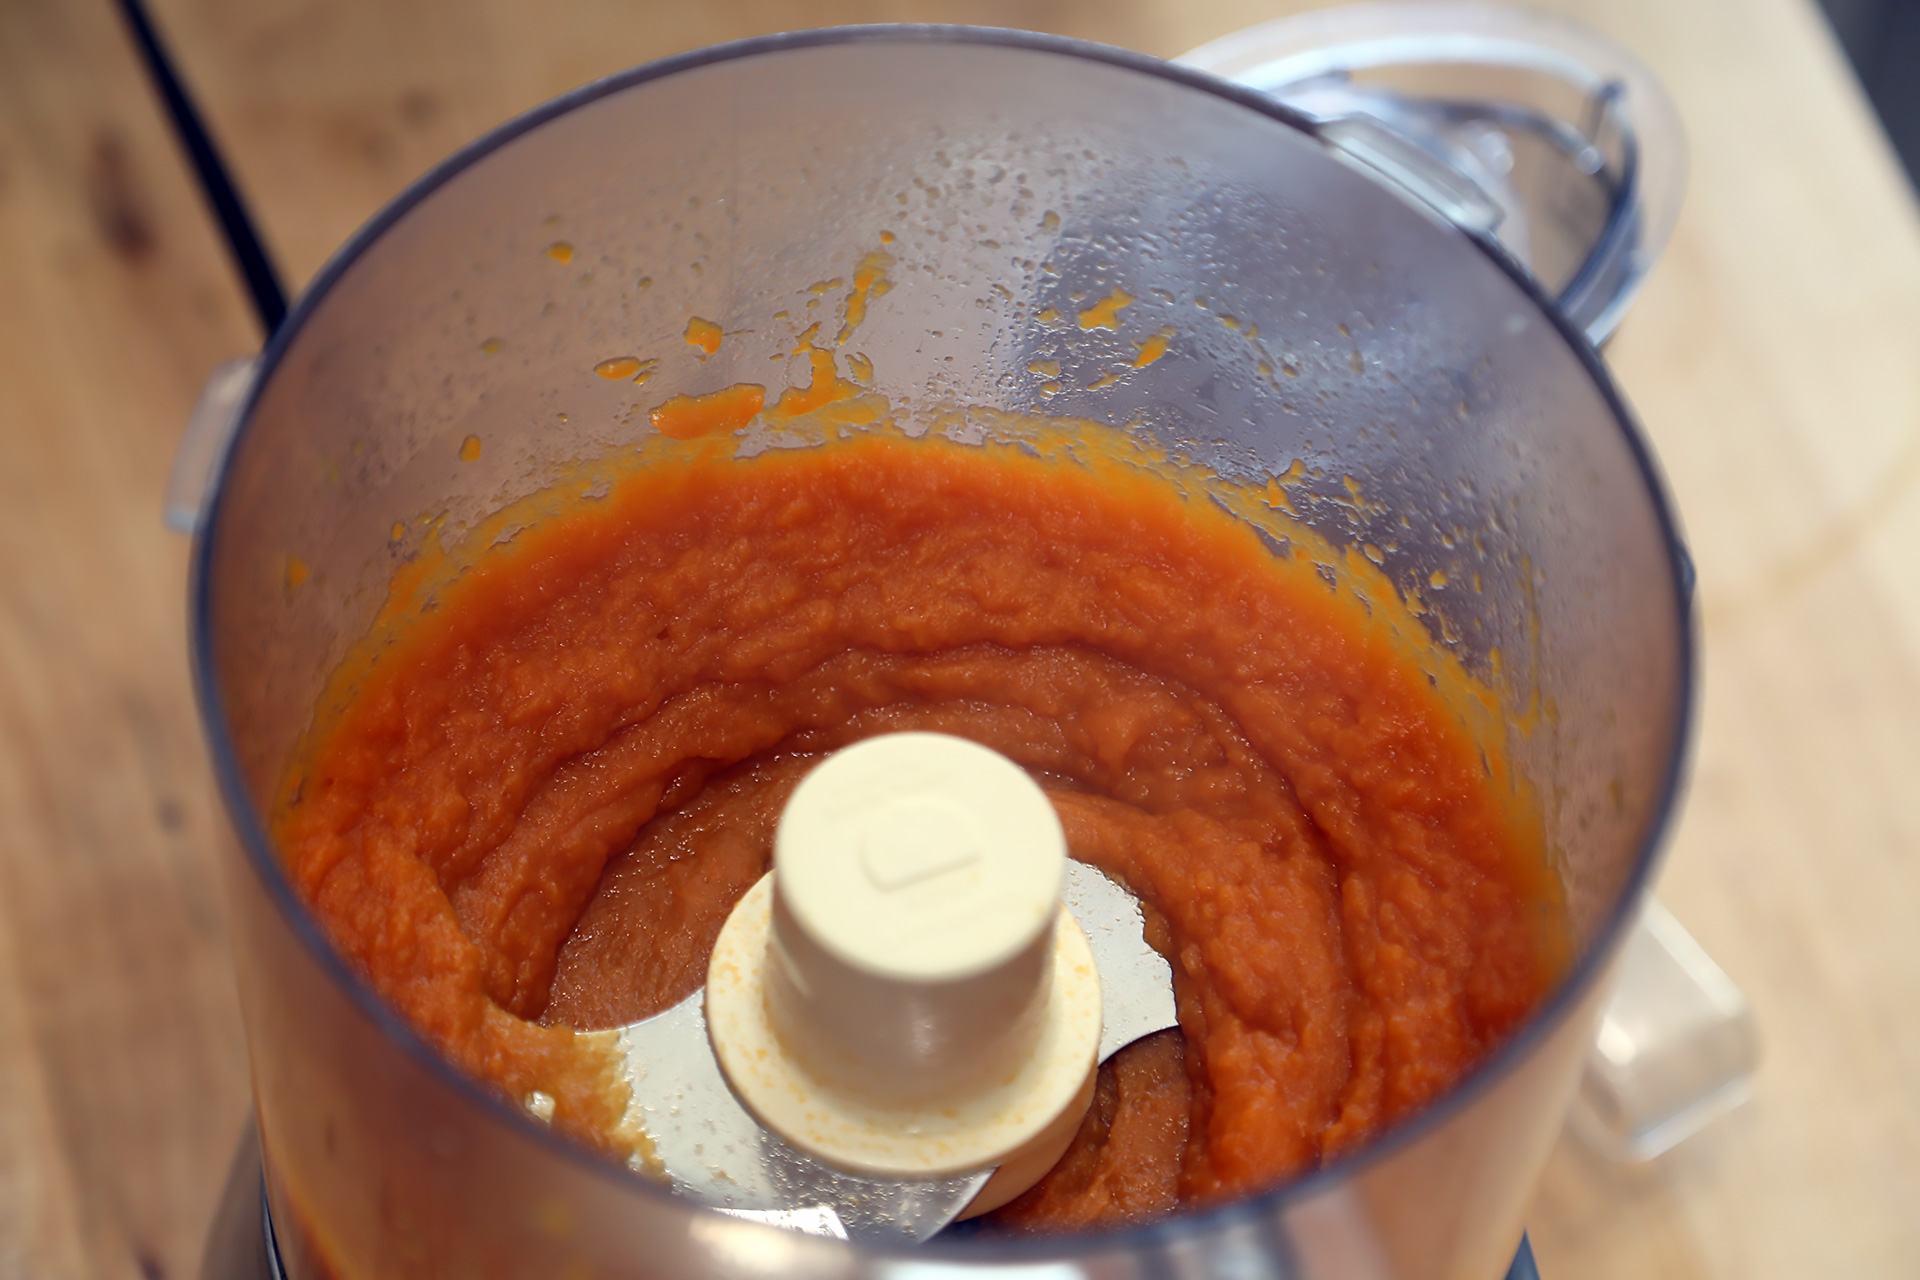 Add the flesh to a food processor and process to a smooth puree.